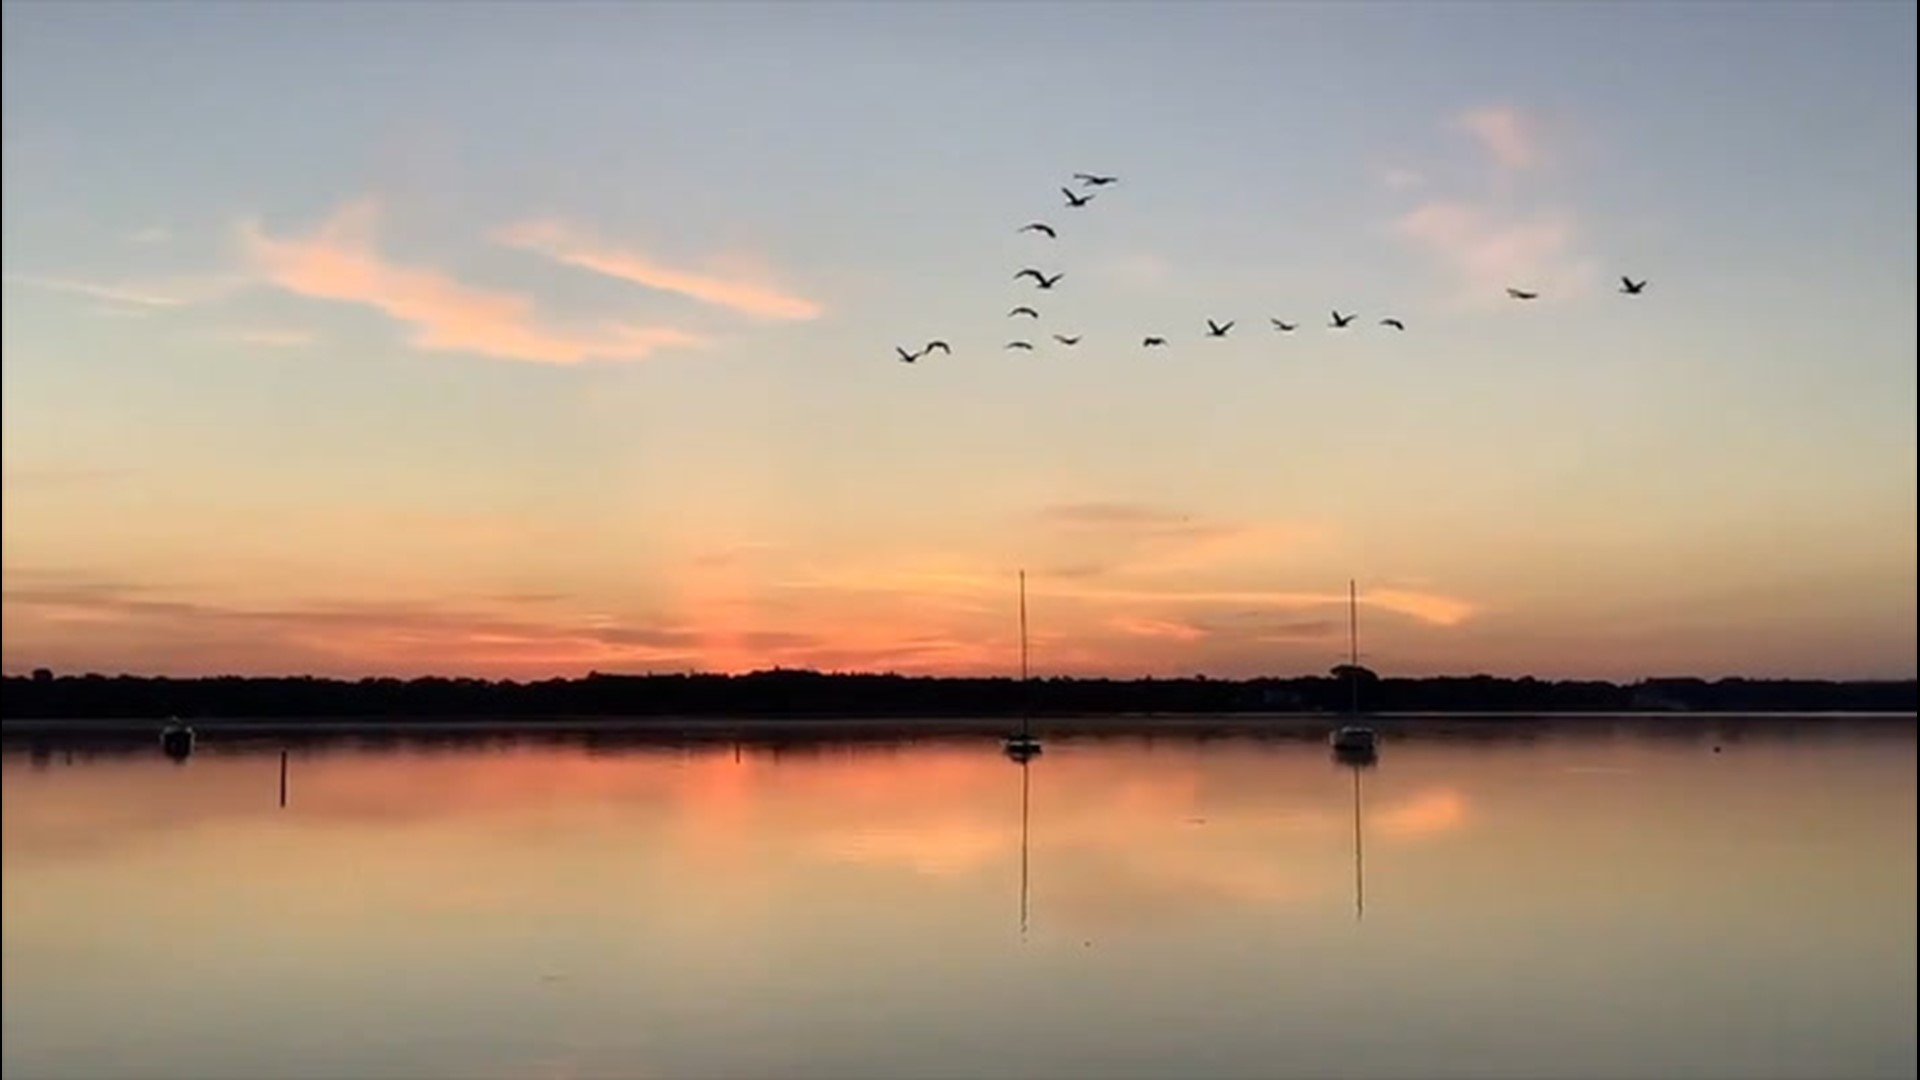 People in Connecticut, Minnesota and Virginia woke up to stunning sunrises to begin their Tuesday morning on June 2. This video shows some of the best sunrises.